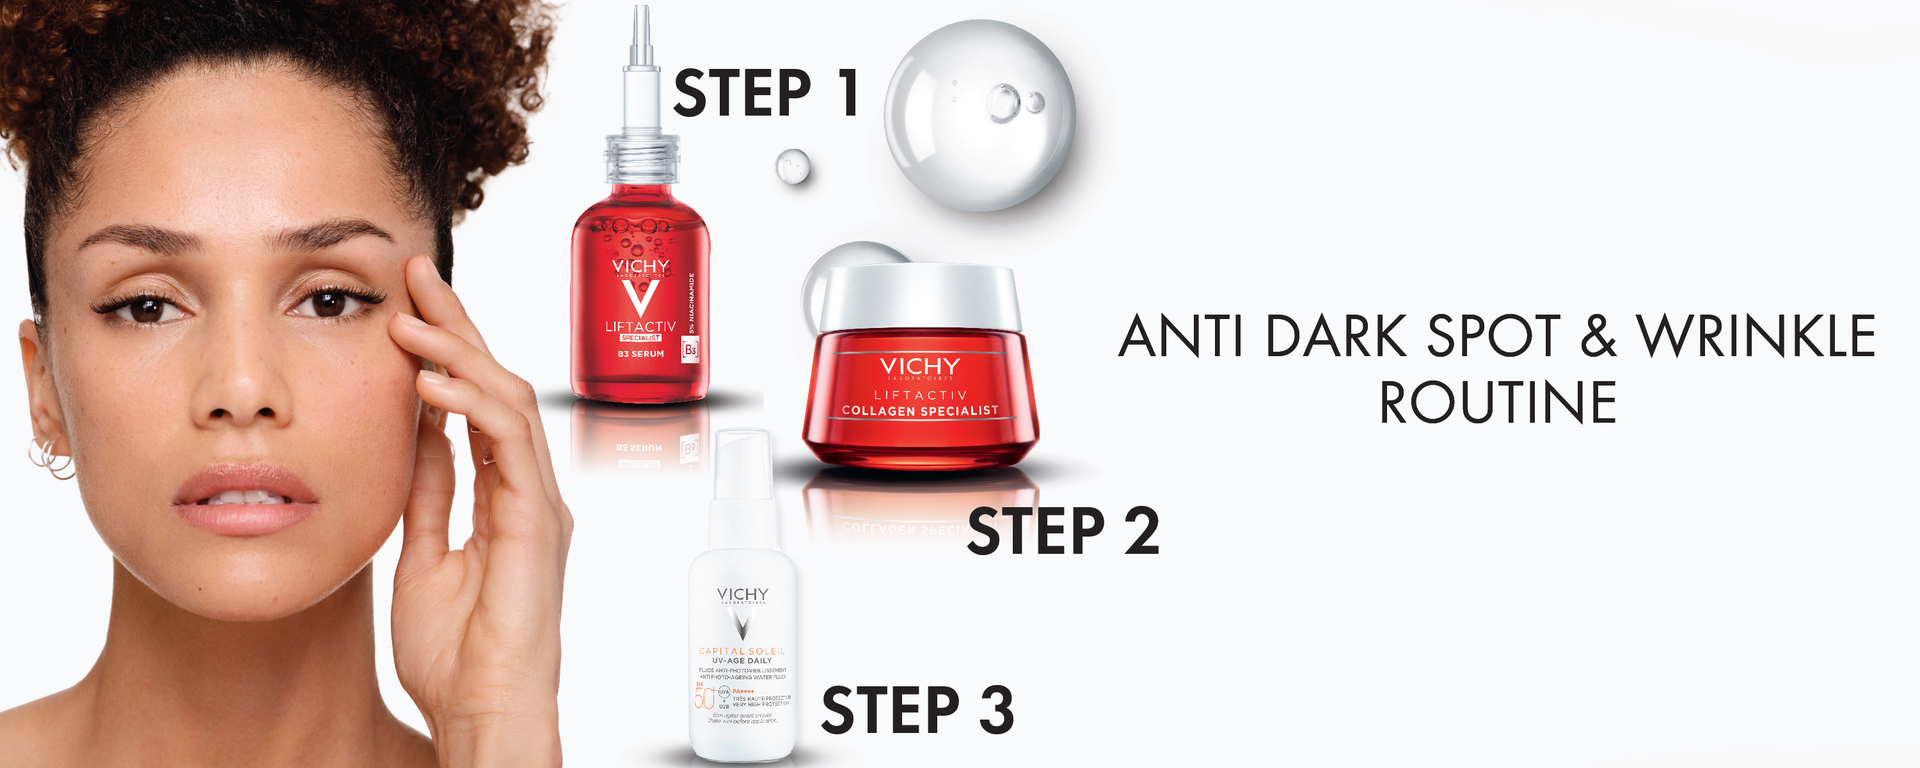 Vichy Laboratoires: cosmetics, beauty products, face care and body